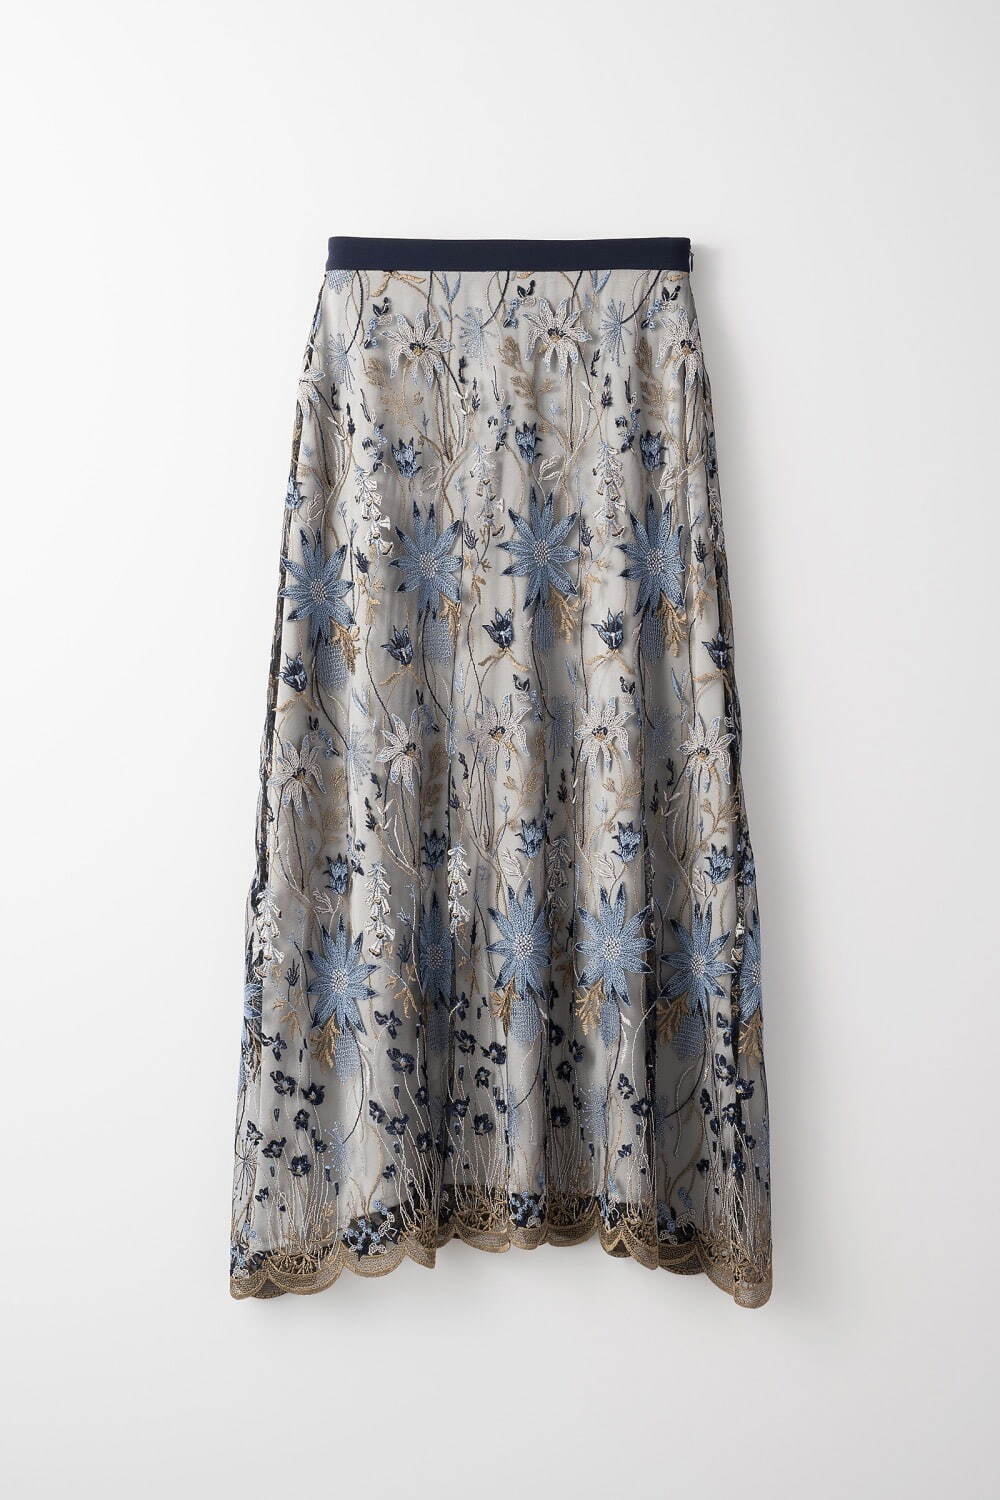 Everlasting embroidery lace skirt 49,500円